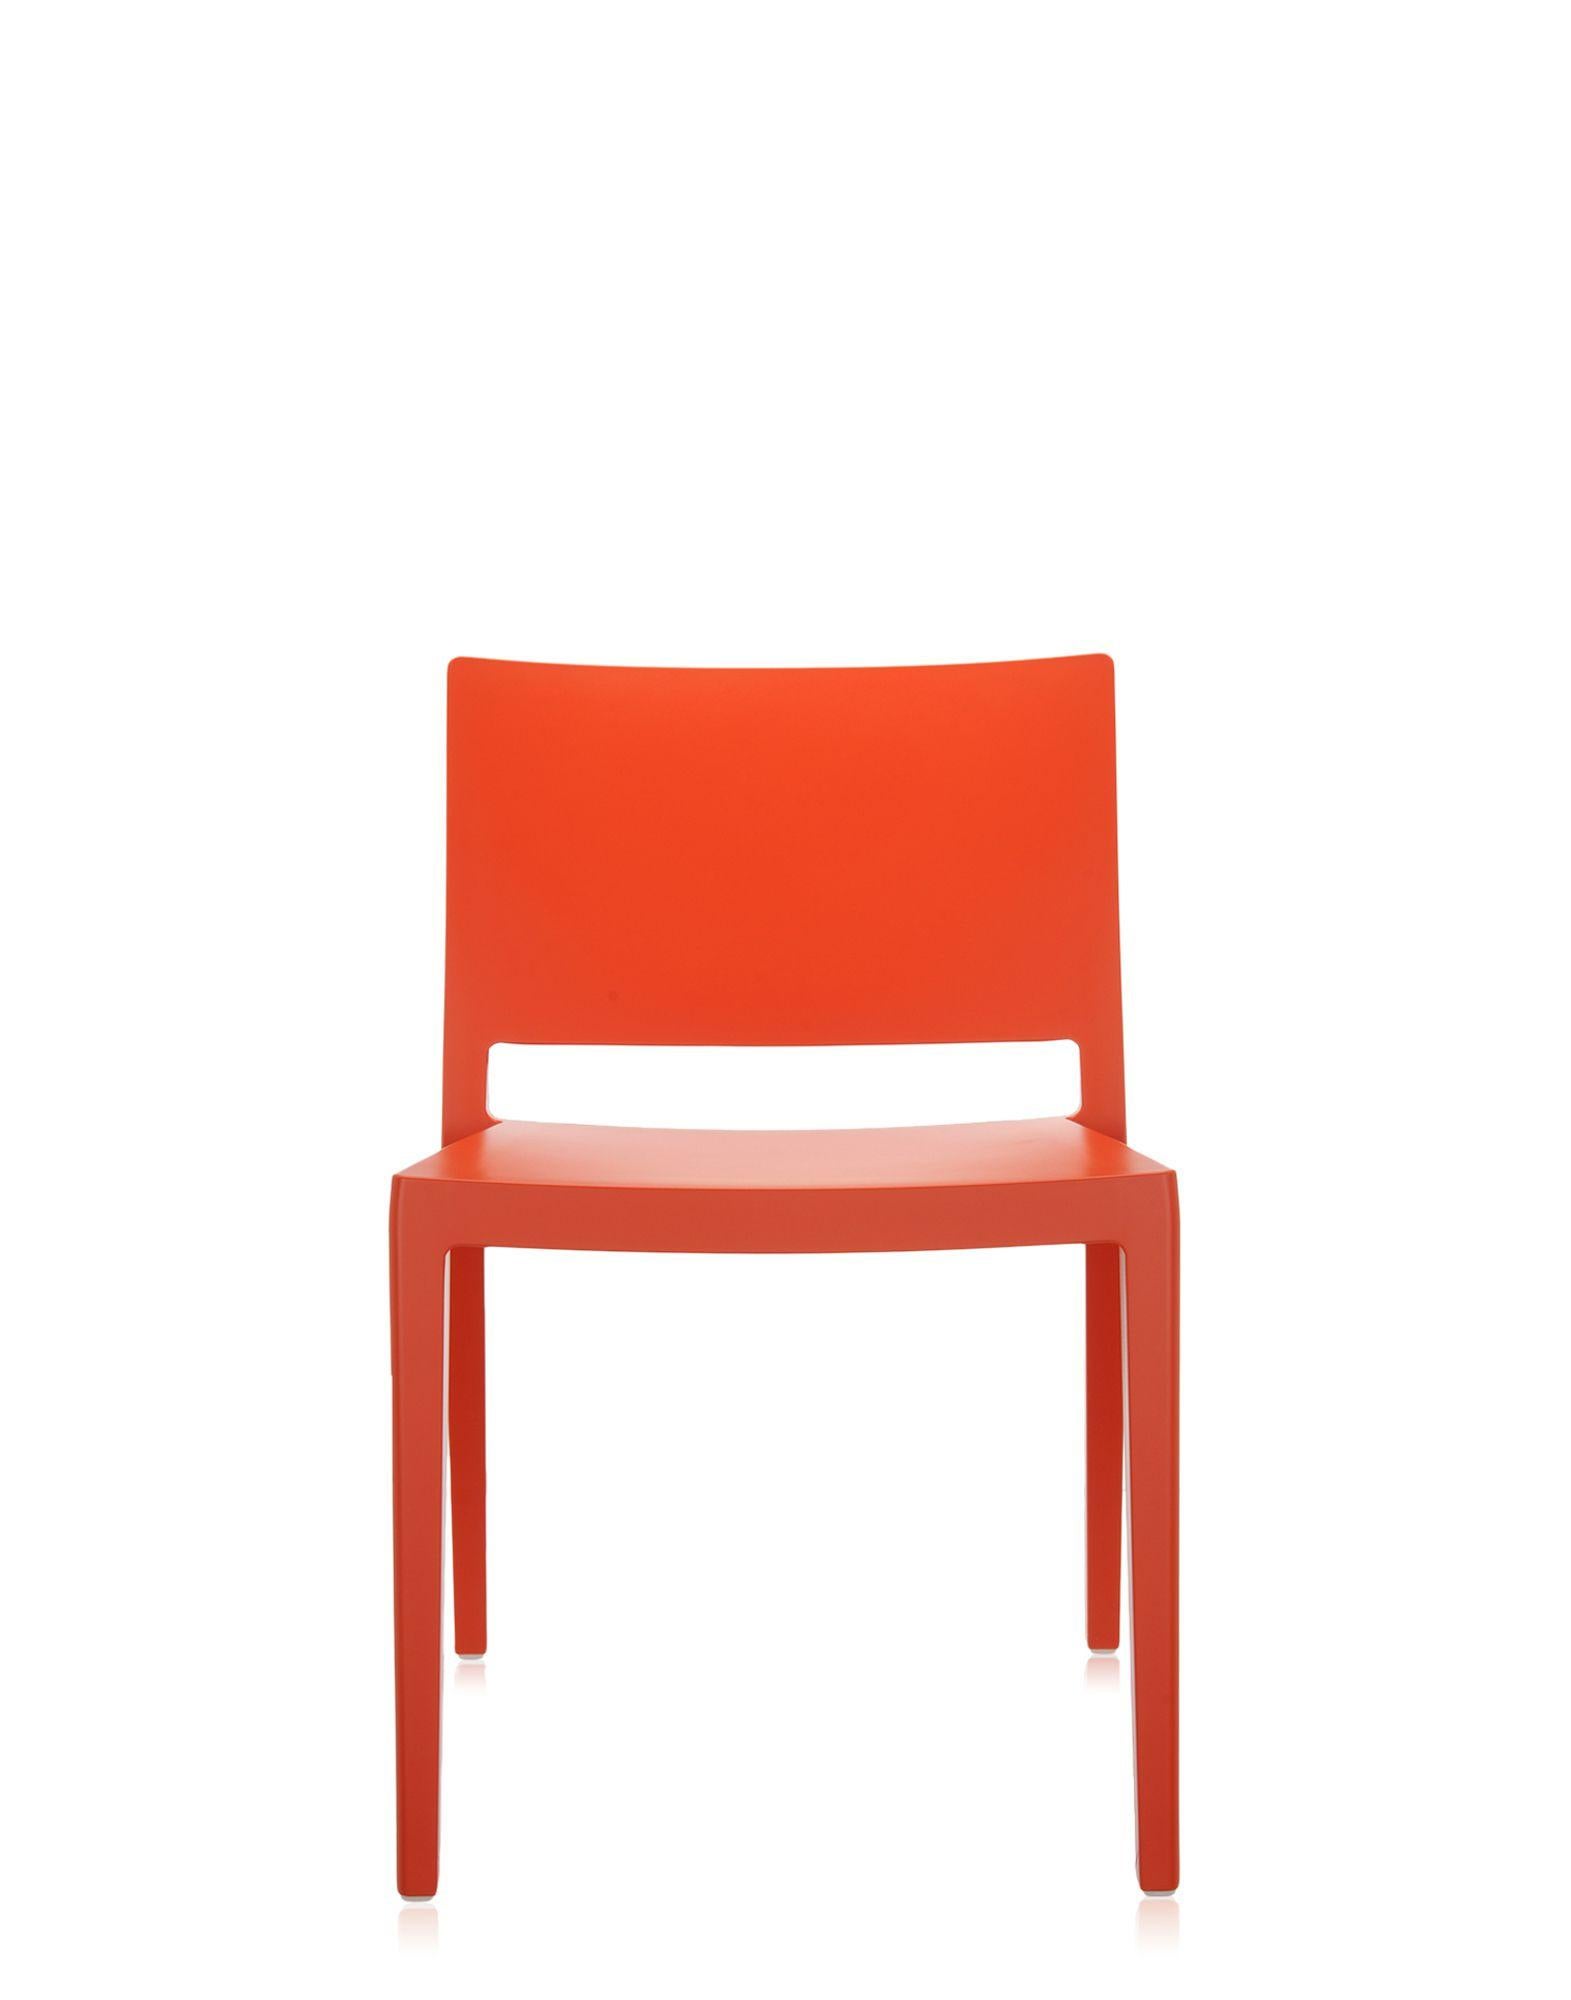 A light, essential and rigorous chair. Its square line is designed by Piero Lissoni, with a wide seat and a wide, low backrest. Created for use around tables, it was born in a range of both gloss and matt colours. The particularity of the material